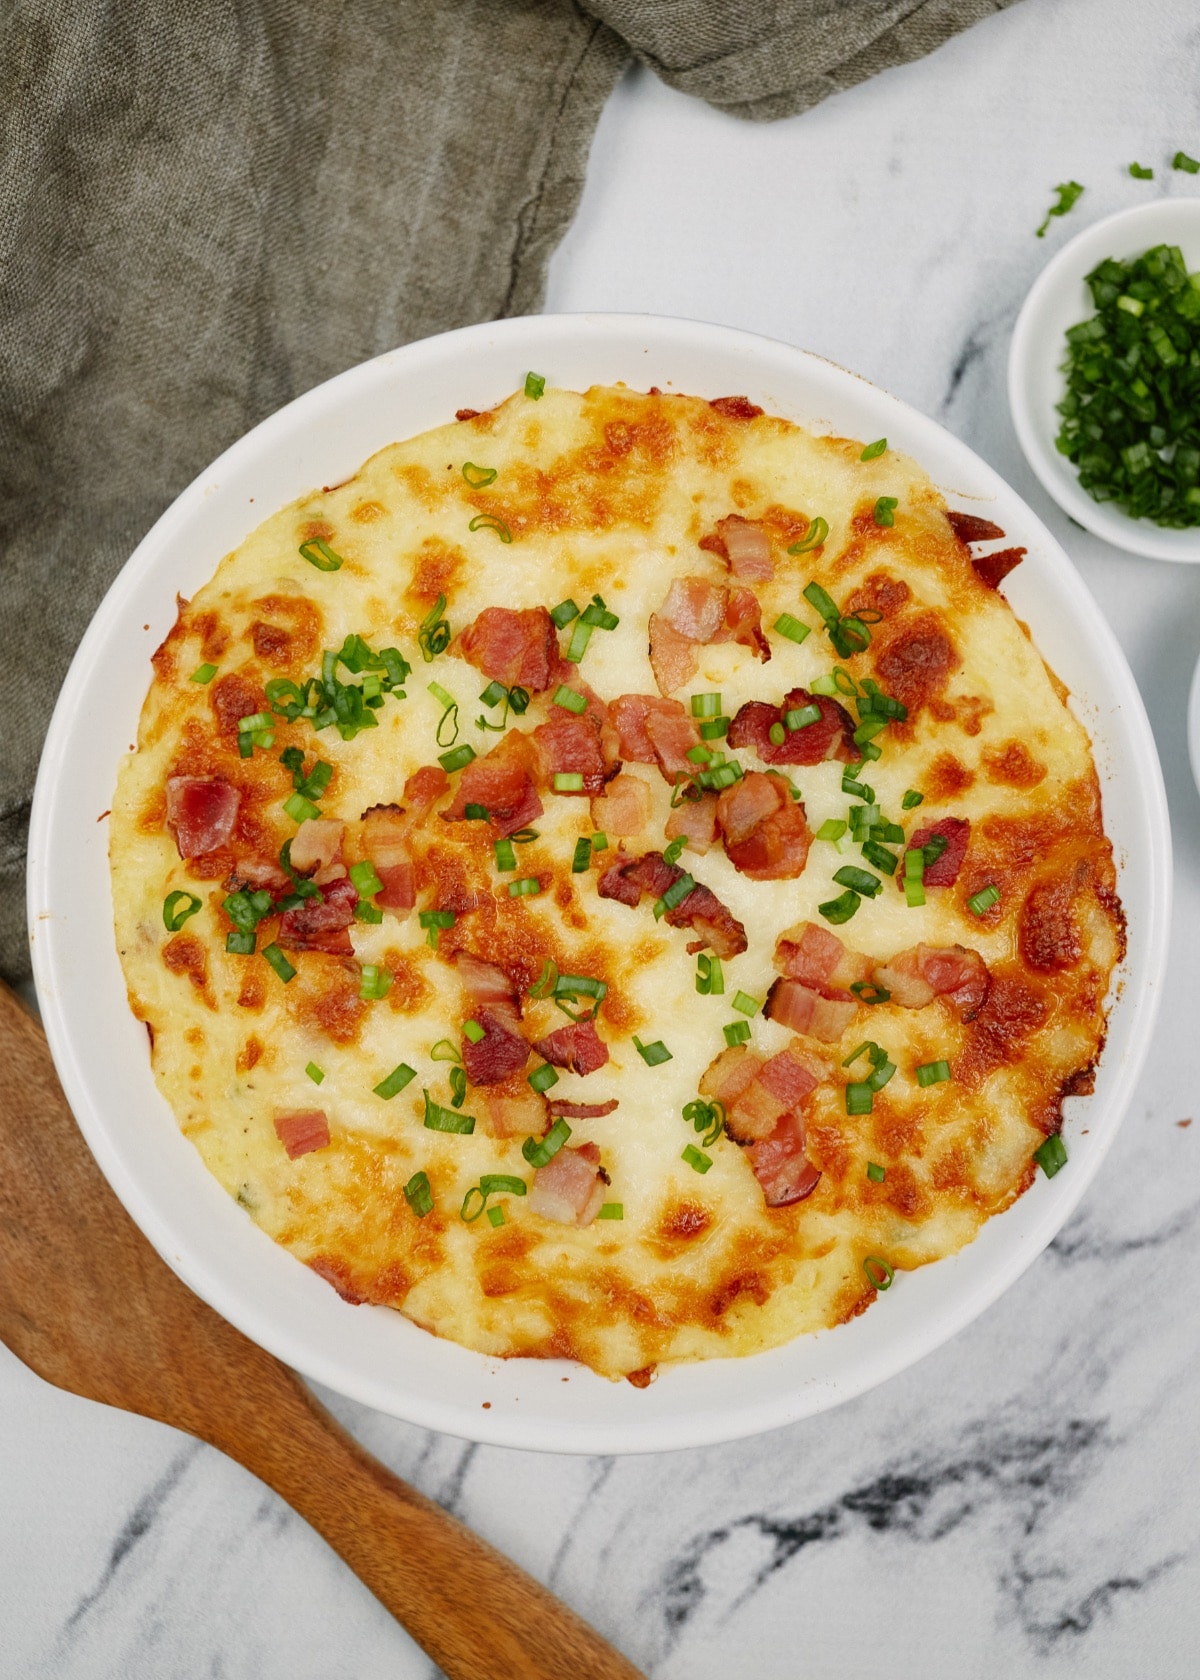 twice baked potato casserole in a baking dish topped with bacon and chives